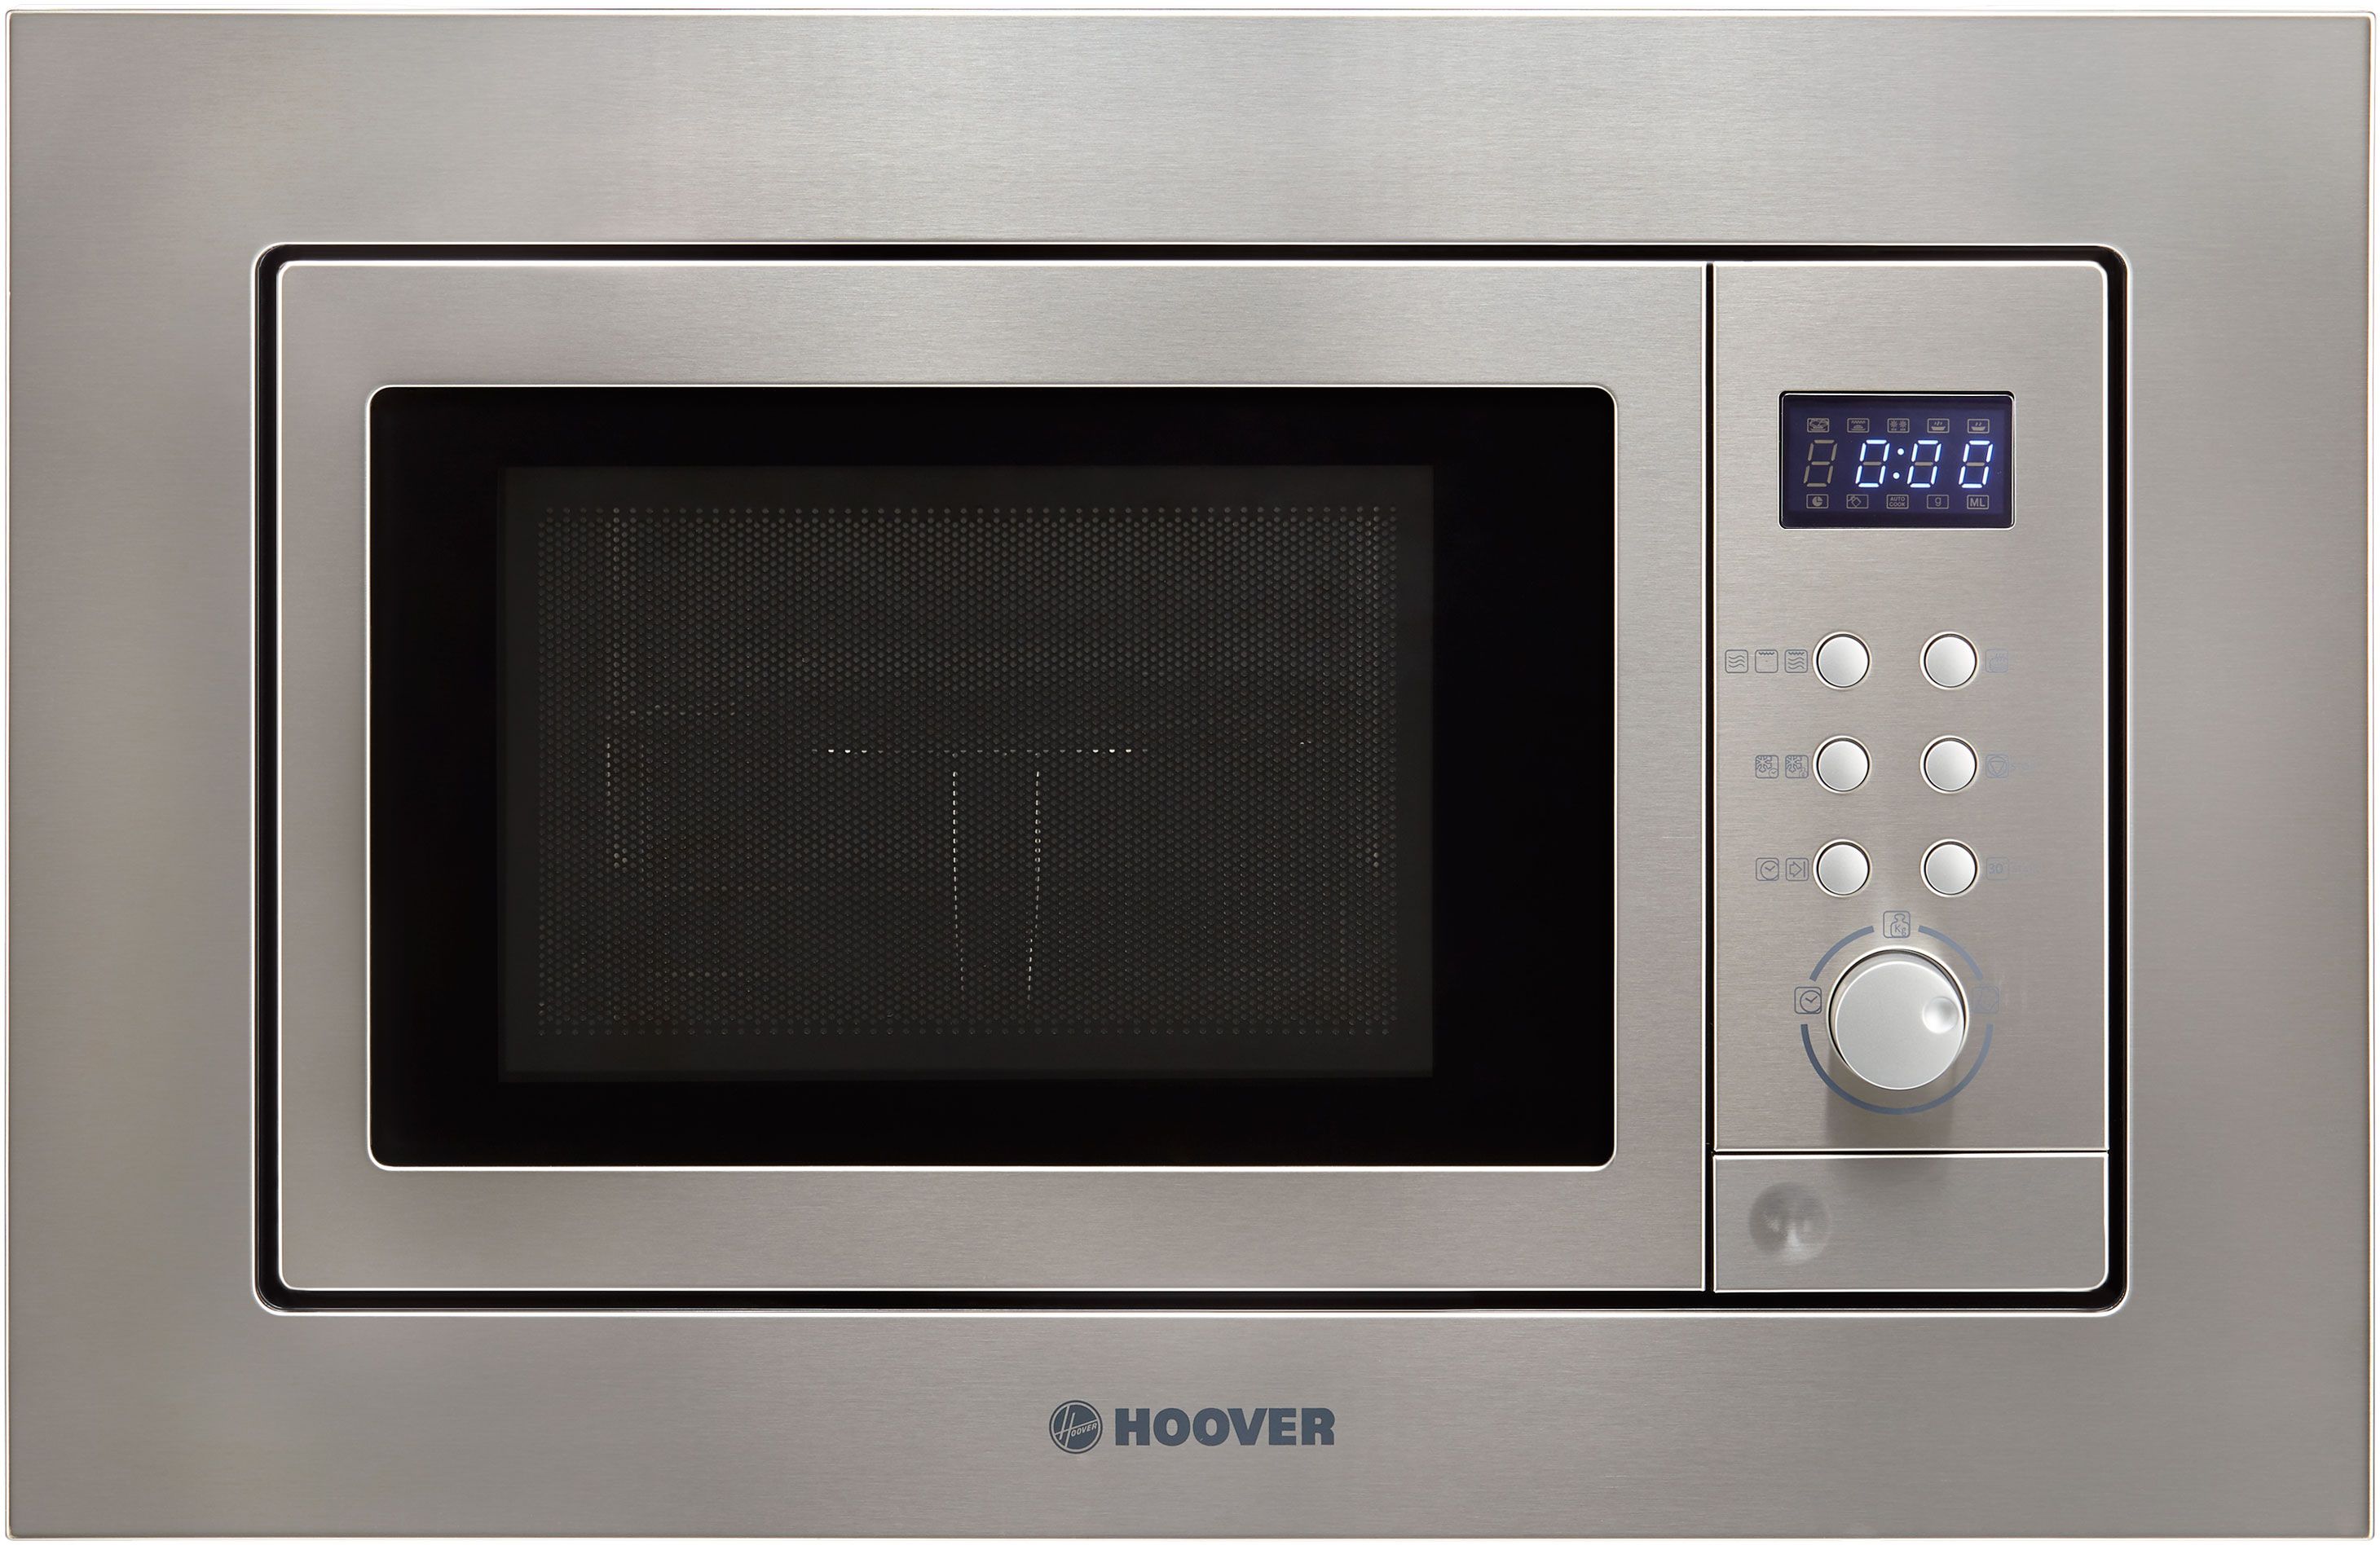 Hoover H-MICROWAVE 100 HM20GX Built In 38cm Tall Compact Microwave - Stainless Steel, Stainless Steel